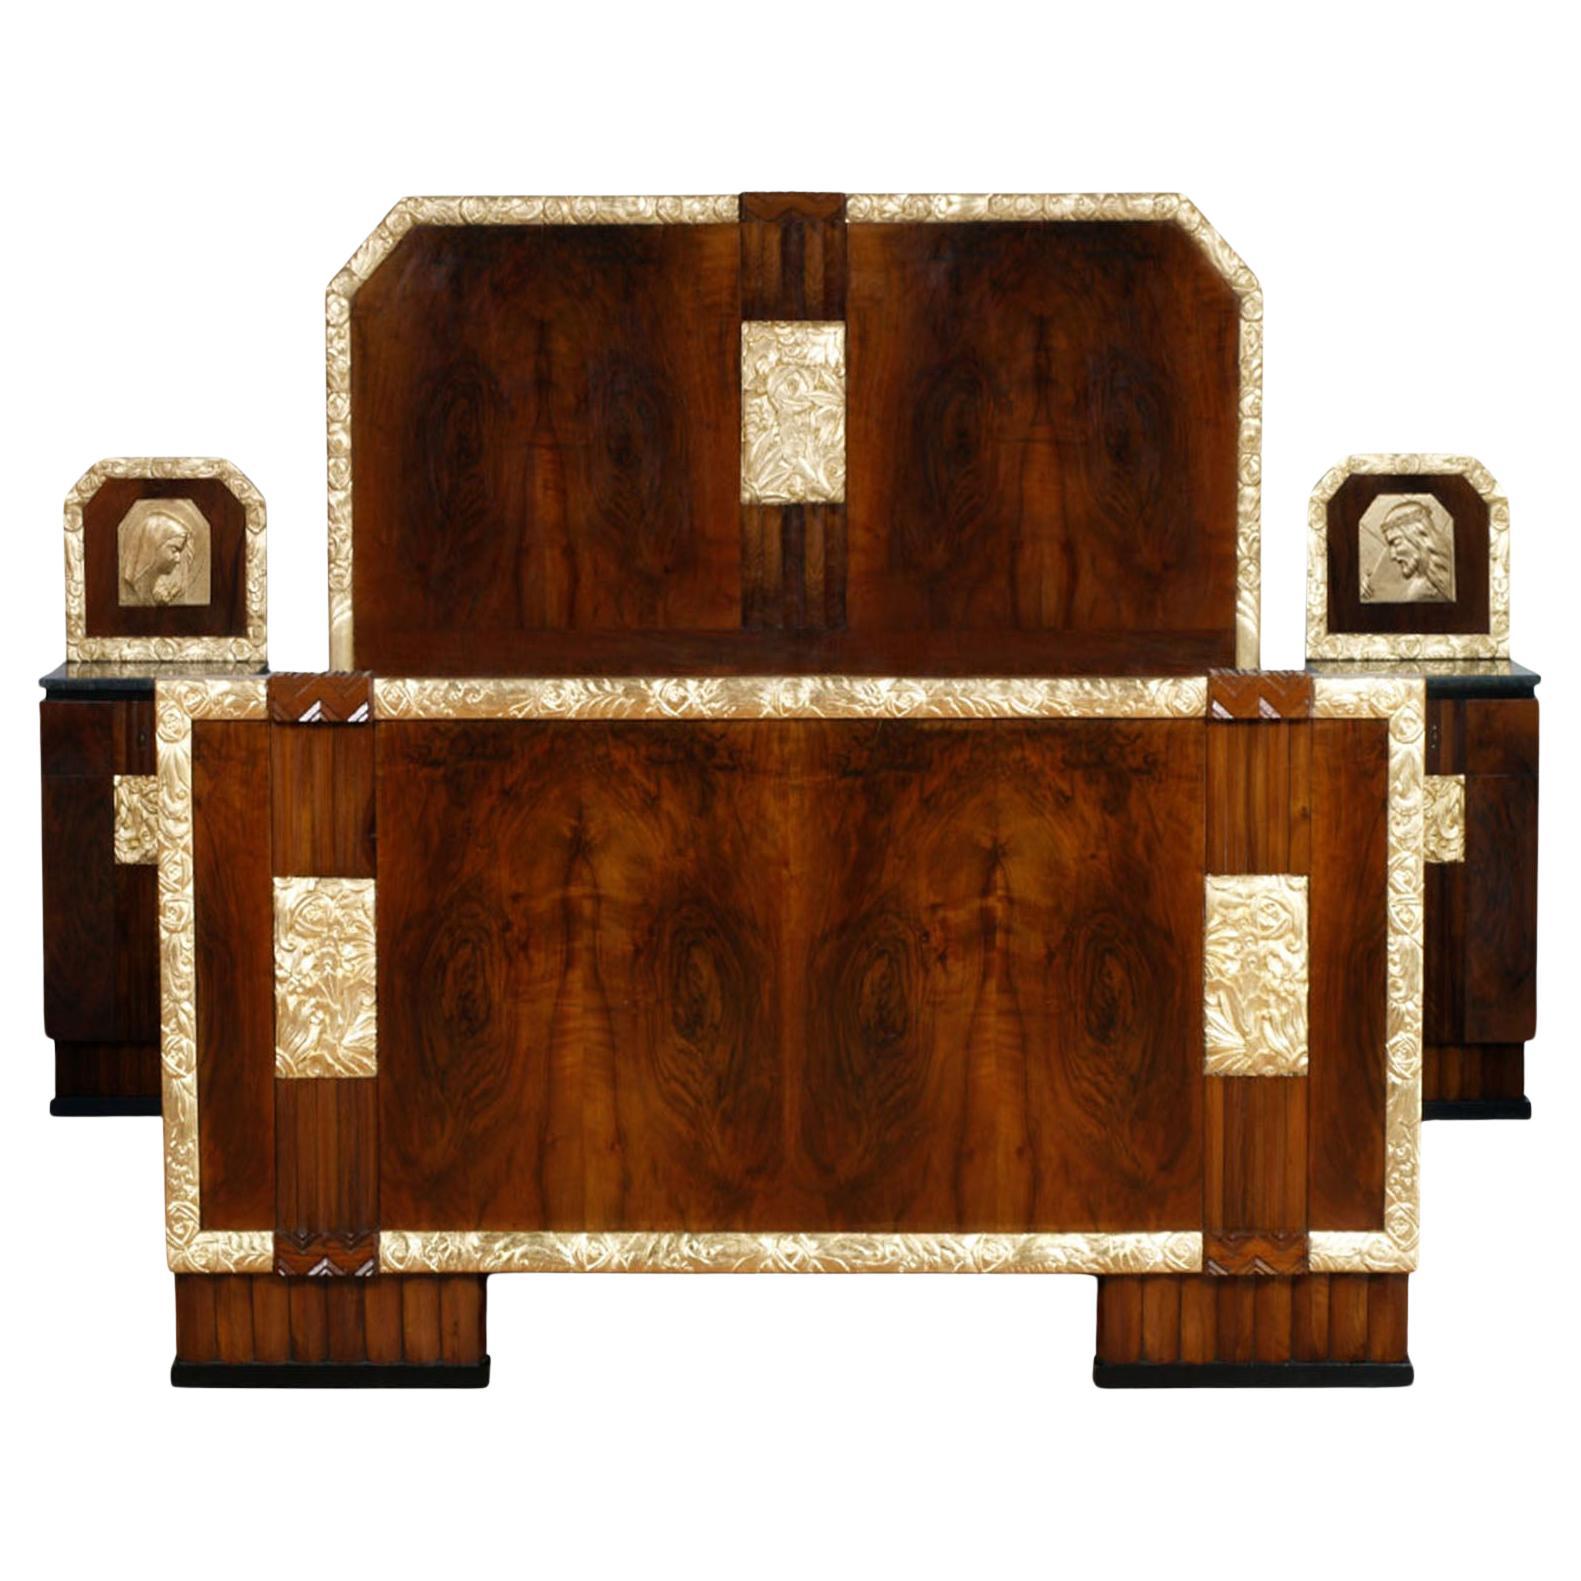 Art Deco Double Bed & Nightstands by Atelier Varedo, Gino Maggioni attributed.